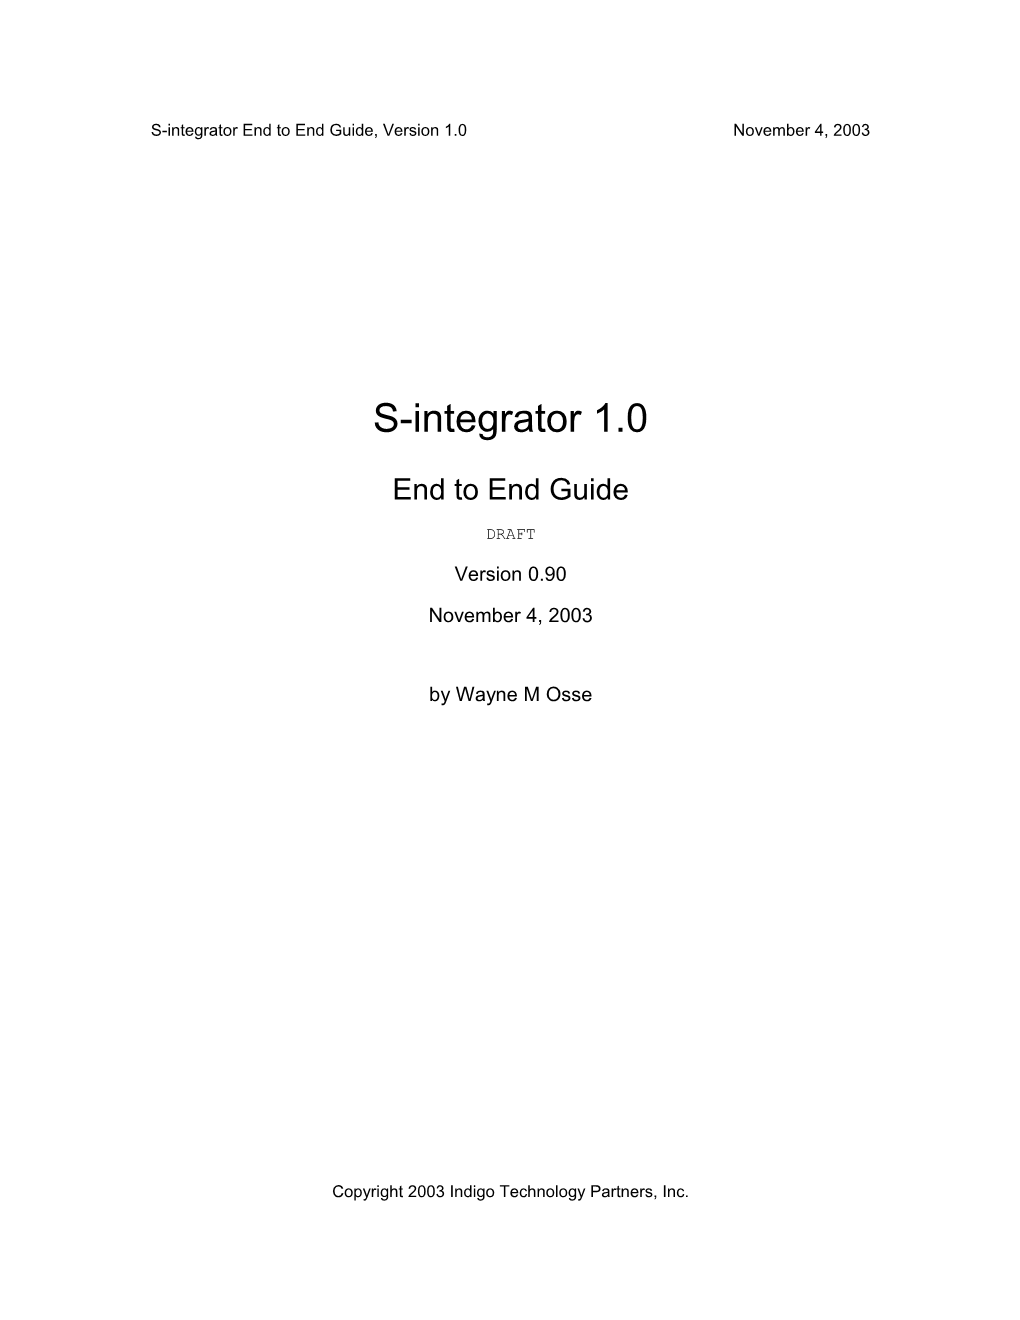 S-Integrator End to End Guide